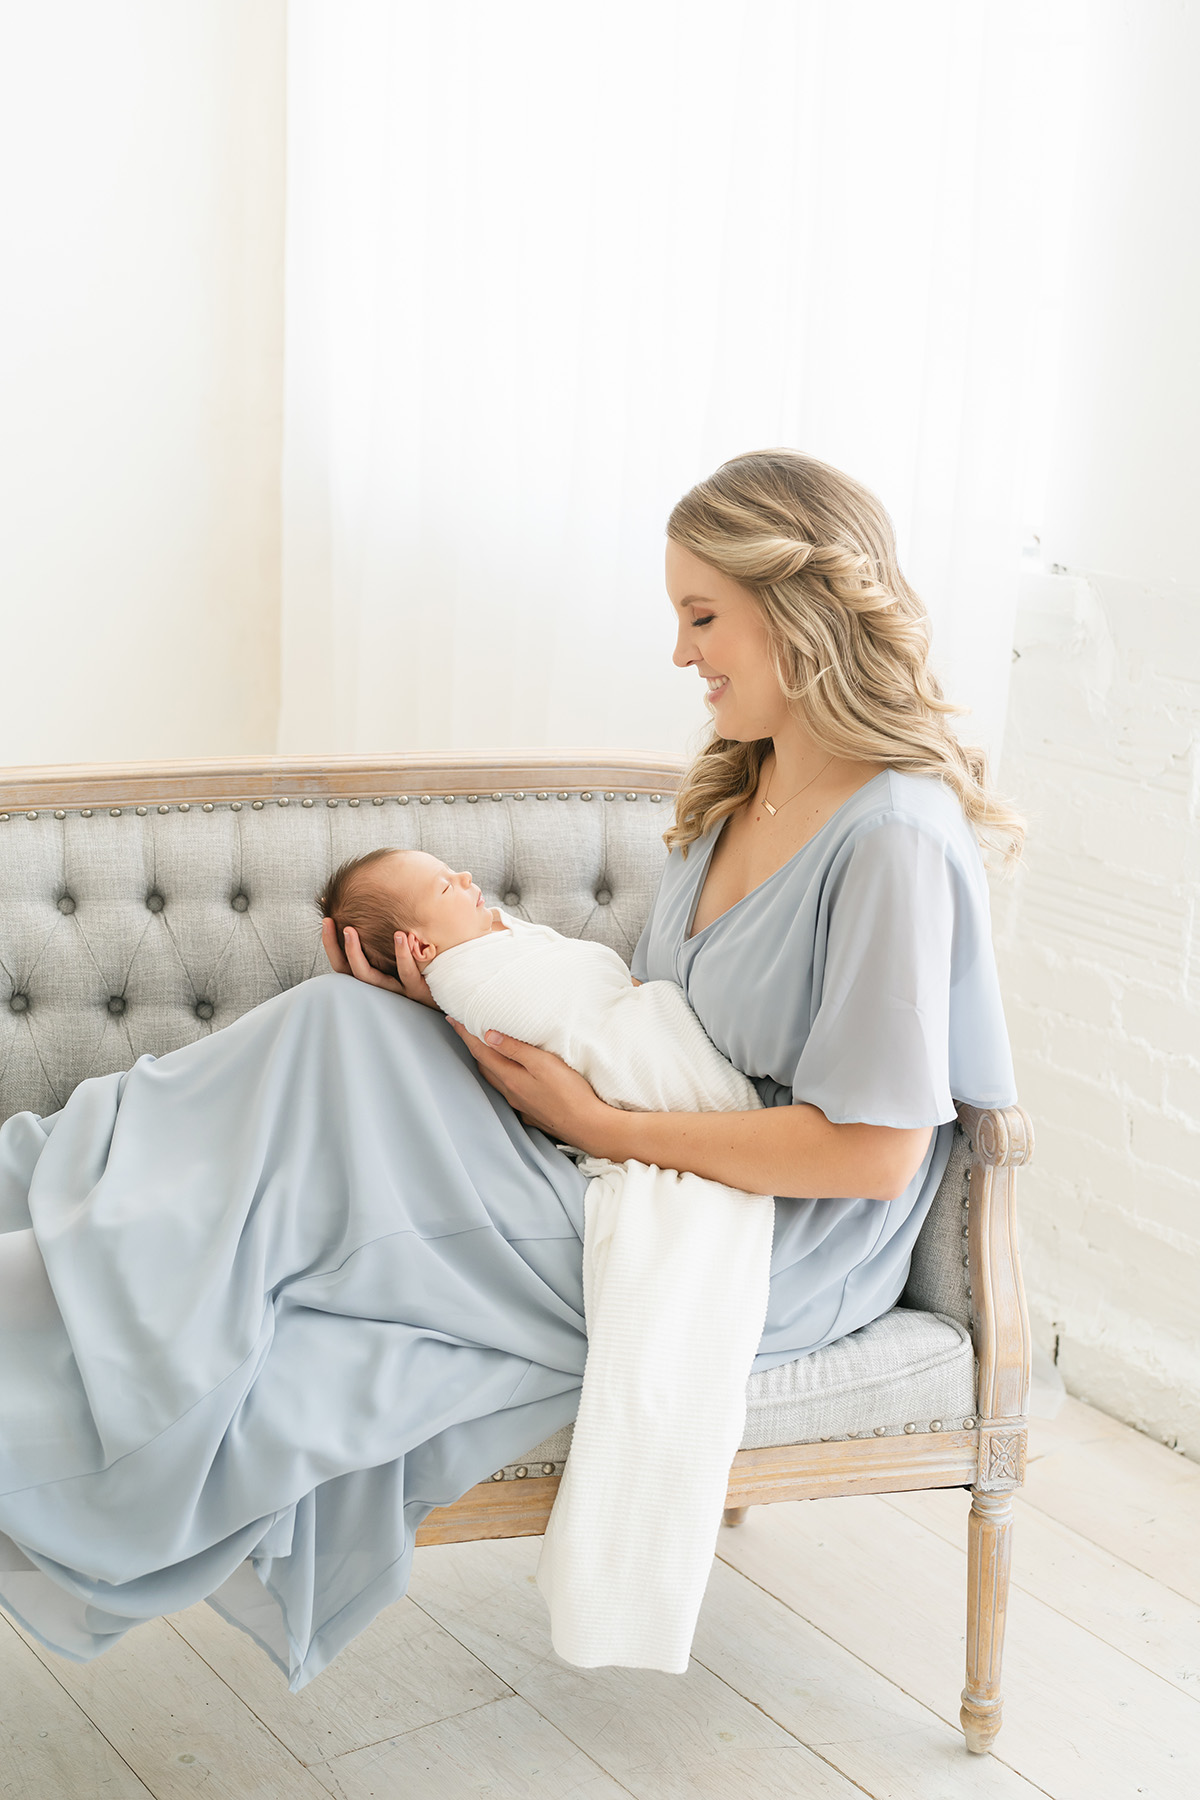 Louisville KY mother wears blue dress from Julie Brock Photography's studio wardrobe for newborn pictures
